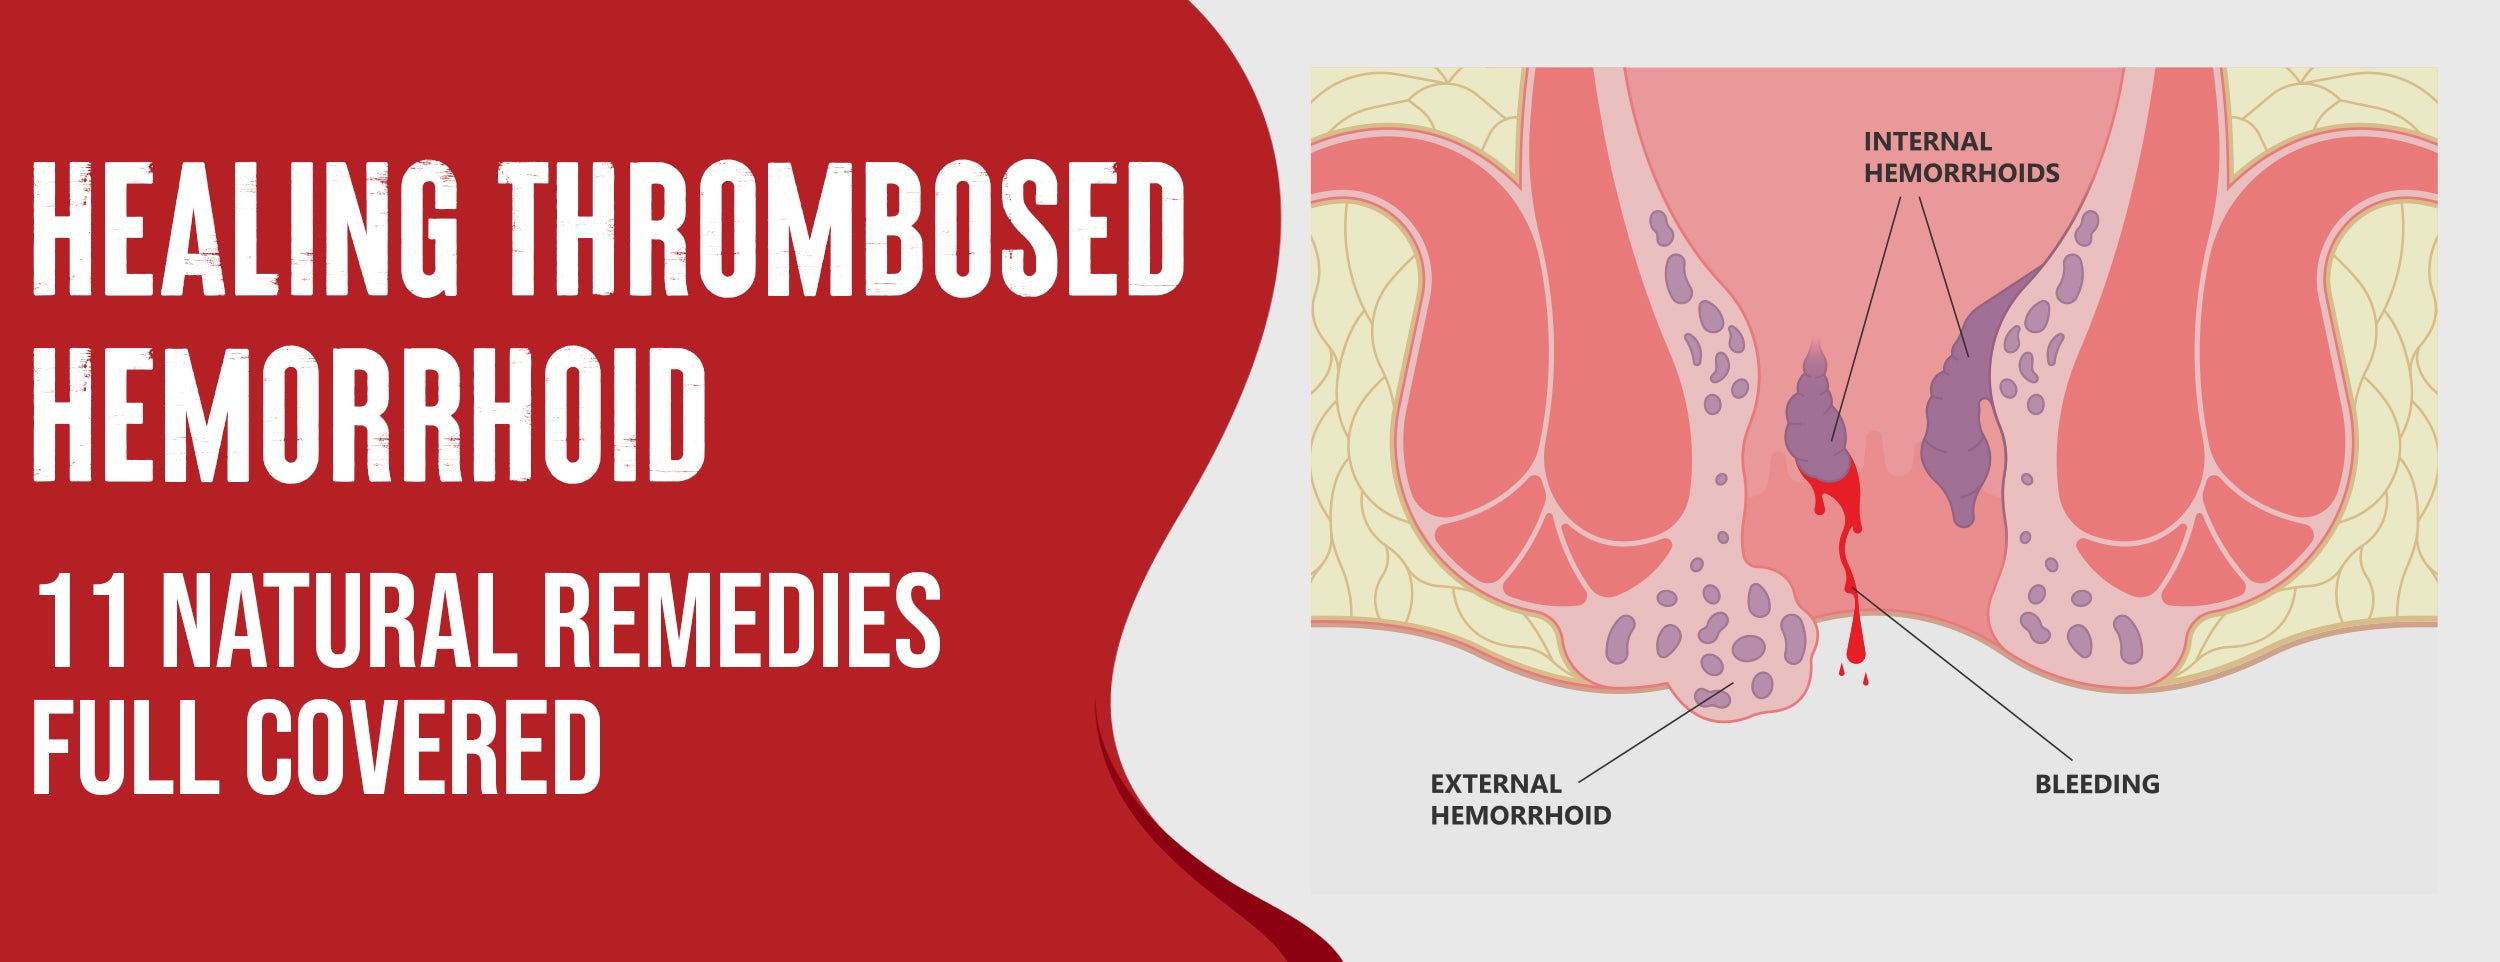 Healing thrombosed hemorrhoid naturally & medically [with home care tips]